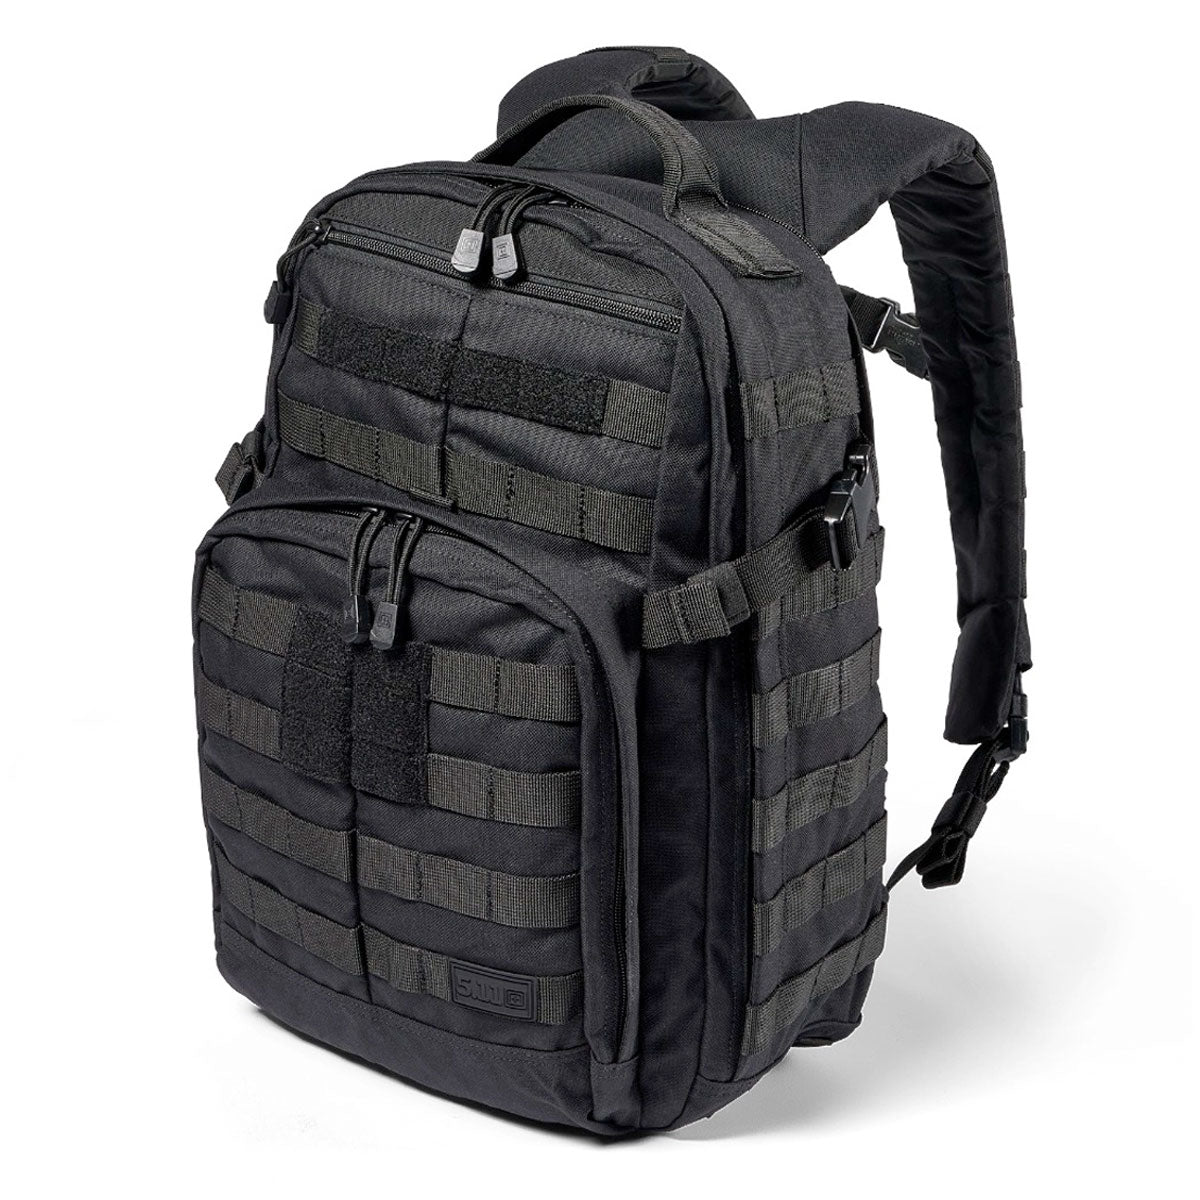 5.11 Tactical Rush 12 Backpack 2.0 Bags, Packs and Cases 5.11 Tactical Black Tactical Gear Supplier Tactical Distributors Australia